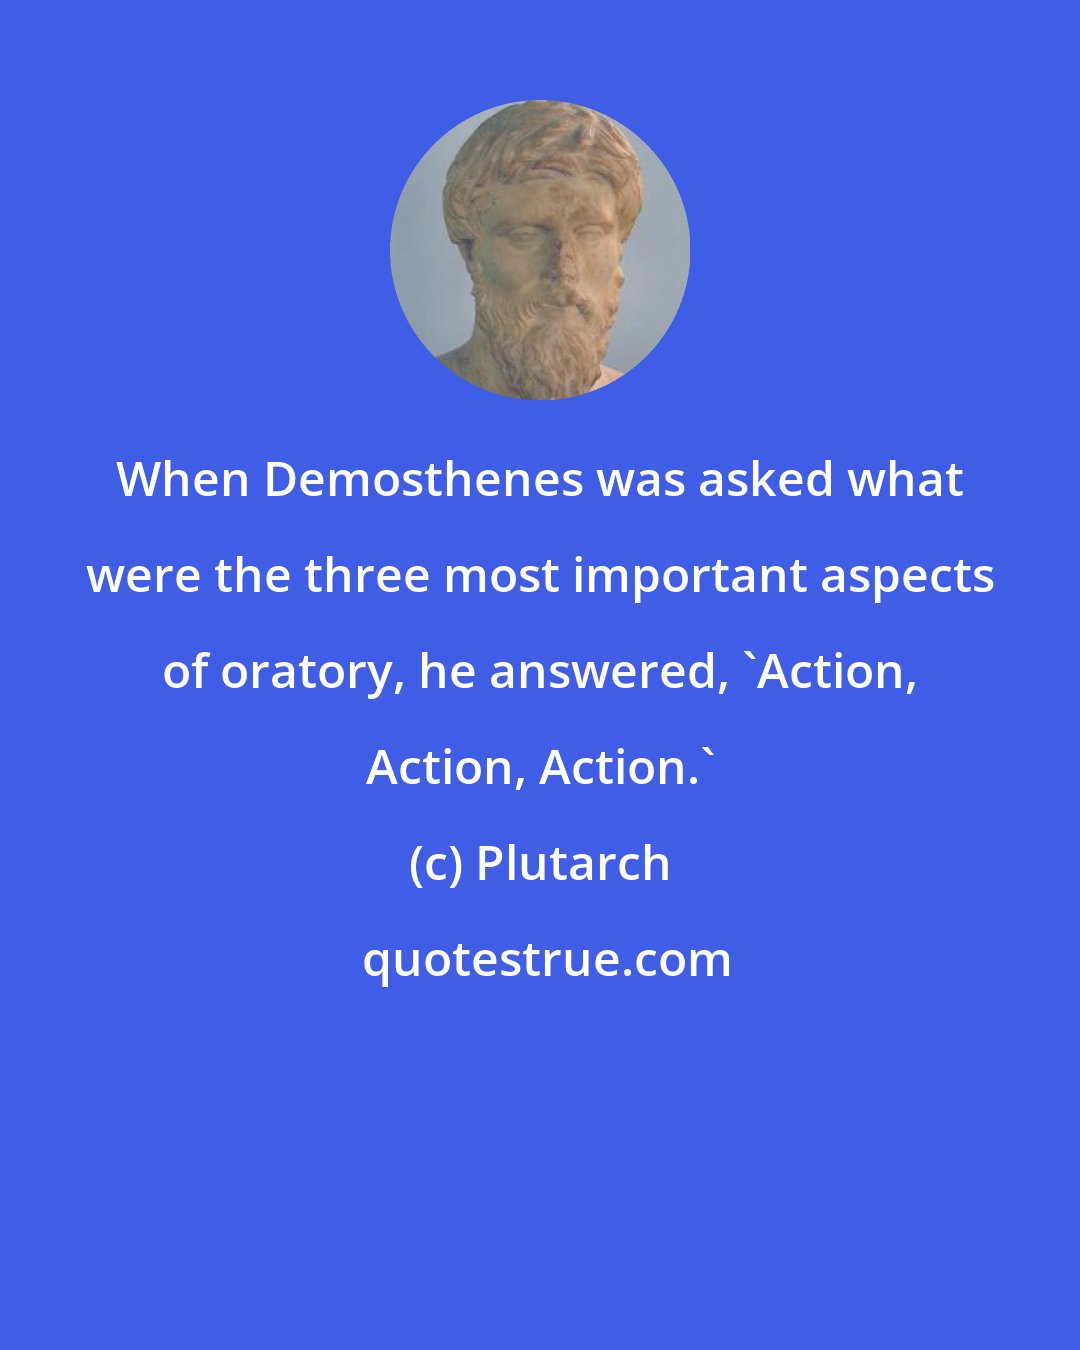 Plutarch: When Demosthenes was asked what were the three most important aspects of oratory, he answered, 'Action, Action, Action.'